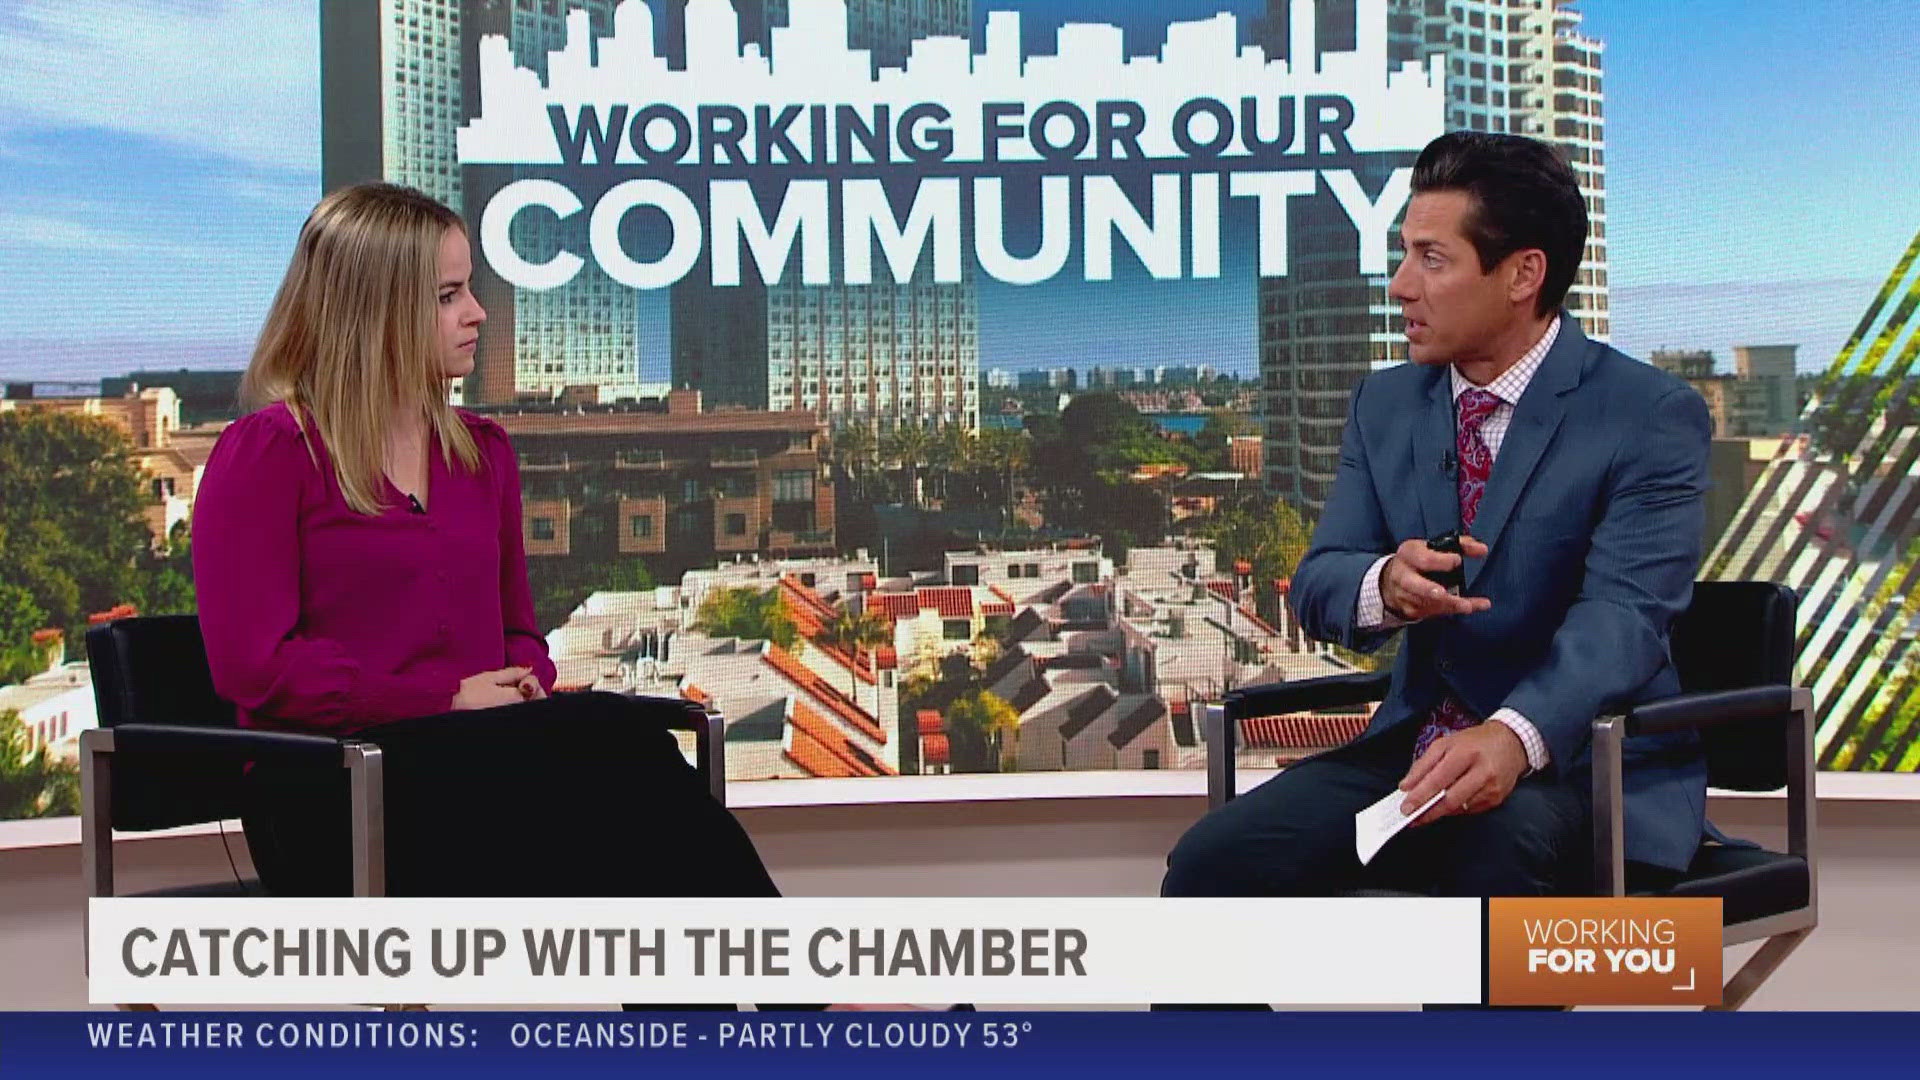 Justine Murray, Executive Director of Public Affairs joined CBS 8 to talk about their recent trip to D.C. to advocate for regional priorities.